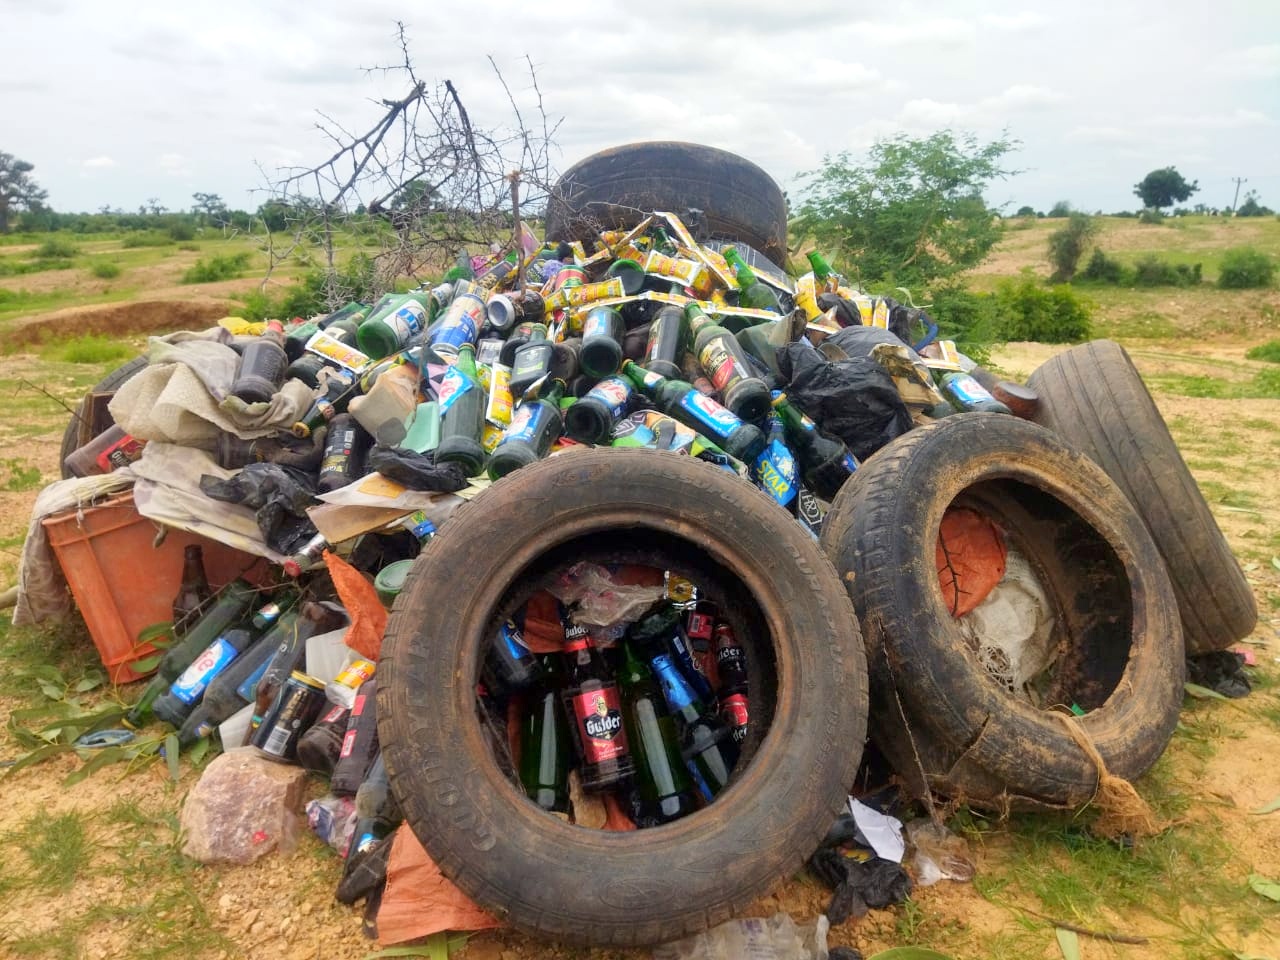 Parked beverages ready for burning(Photo Credit: Premium Times)